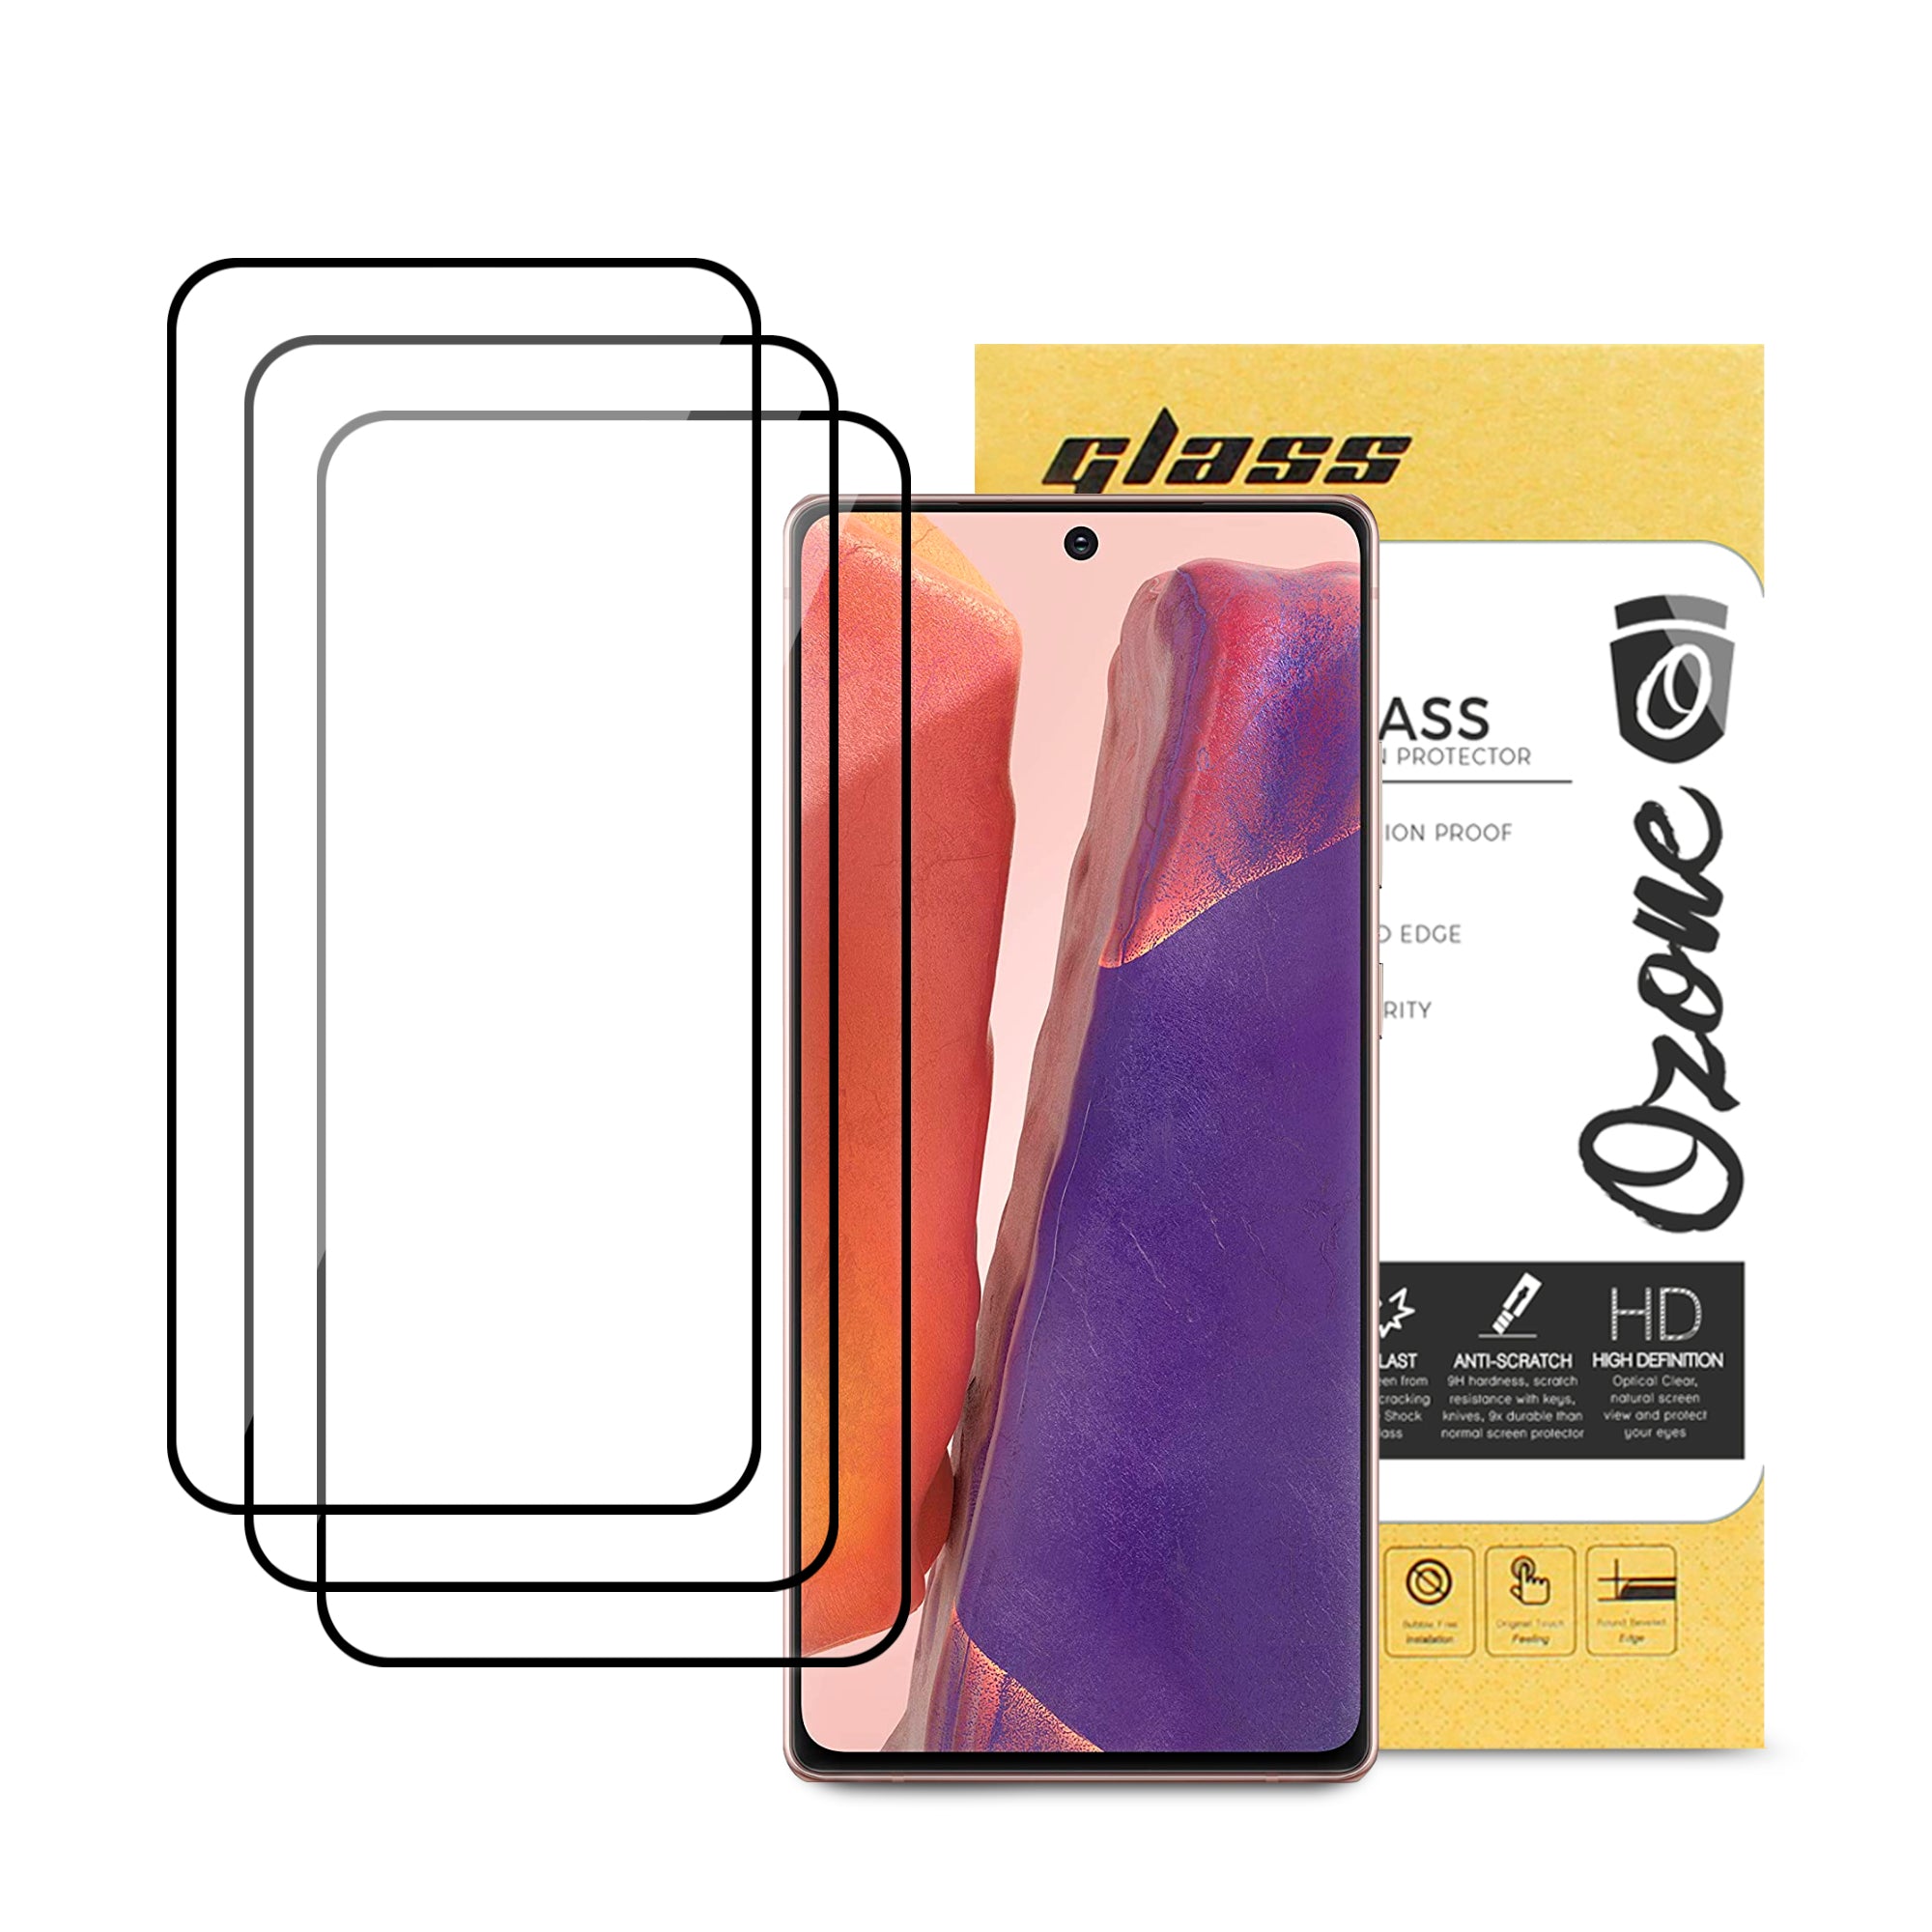 Samsung Galaxy Note 20 Screen Protectors | Tempered Glass | Pack of 3